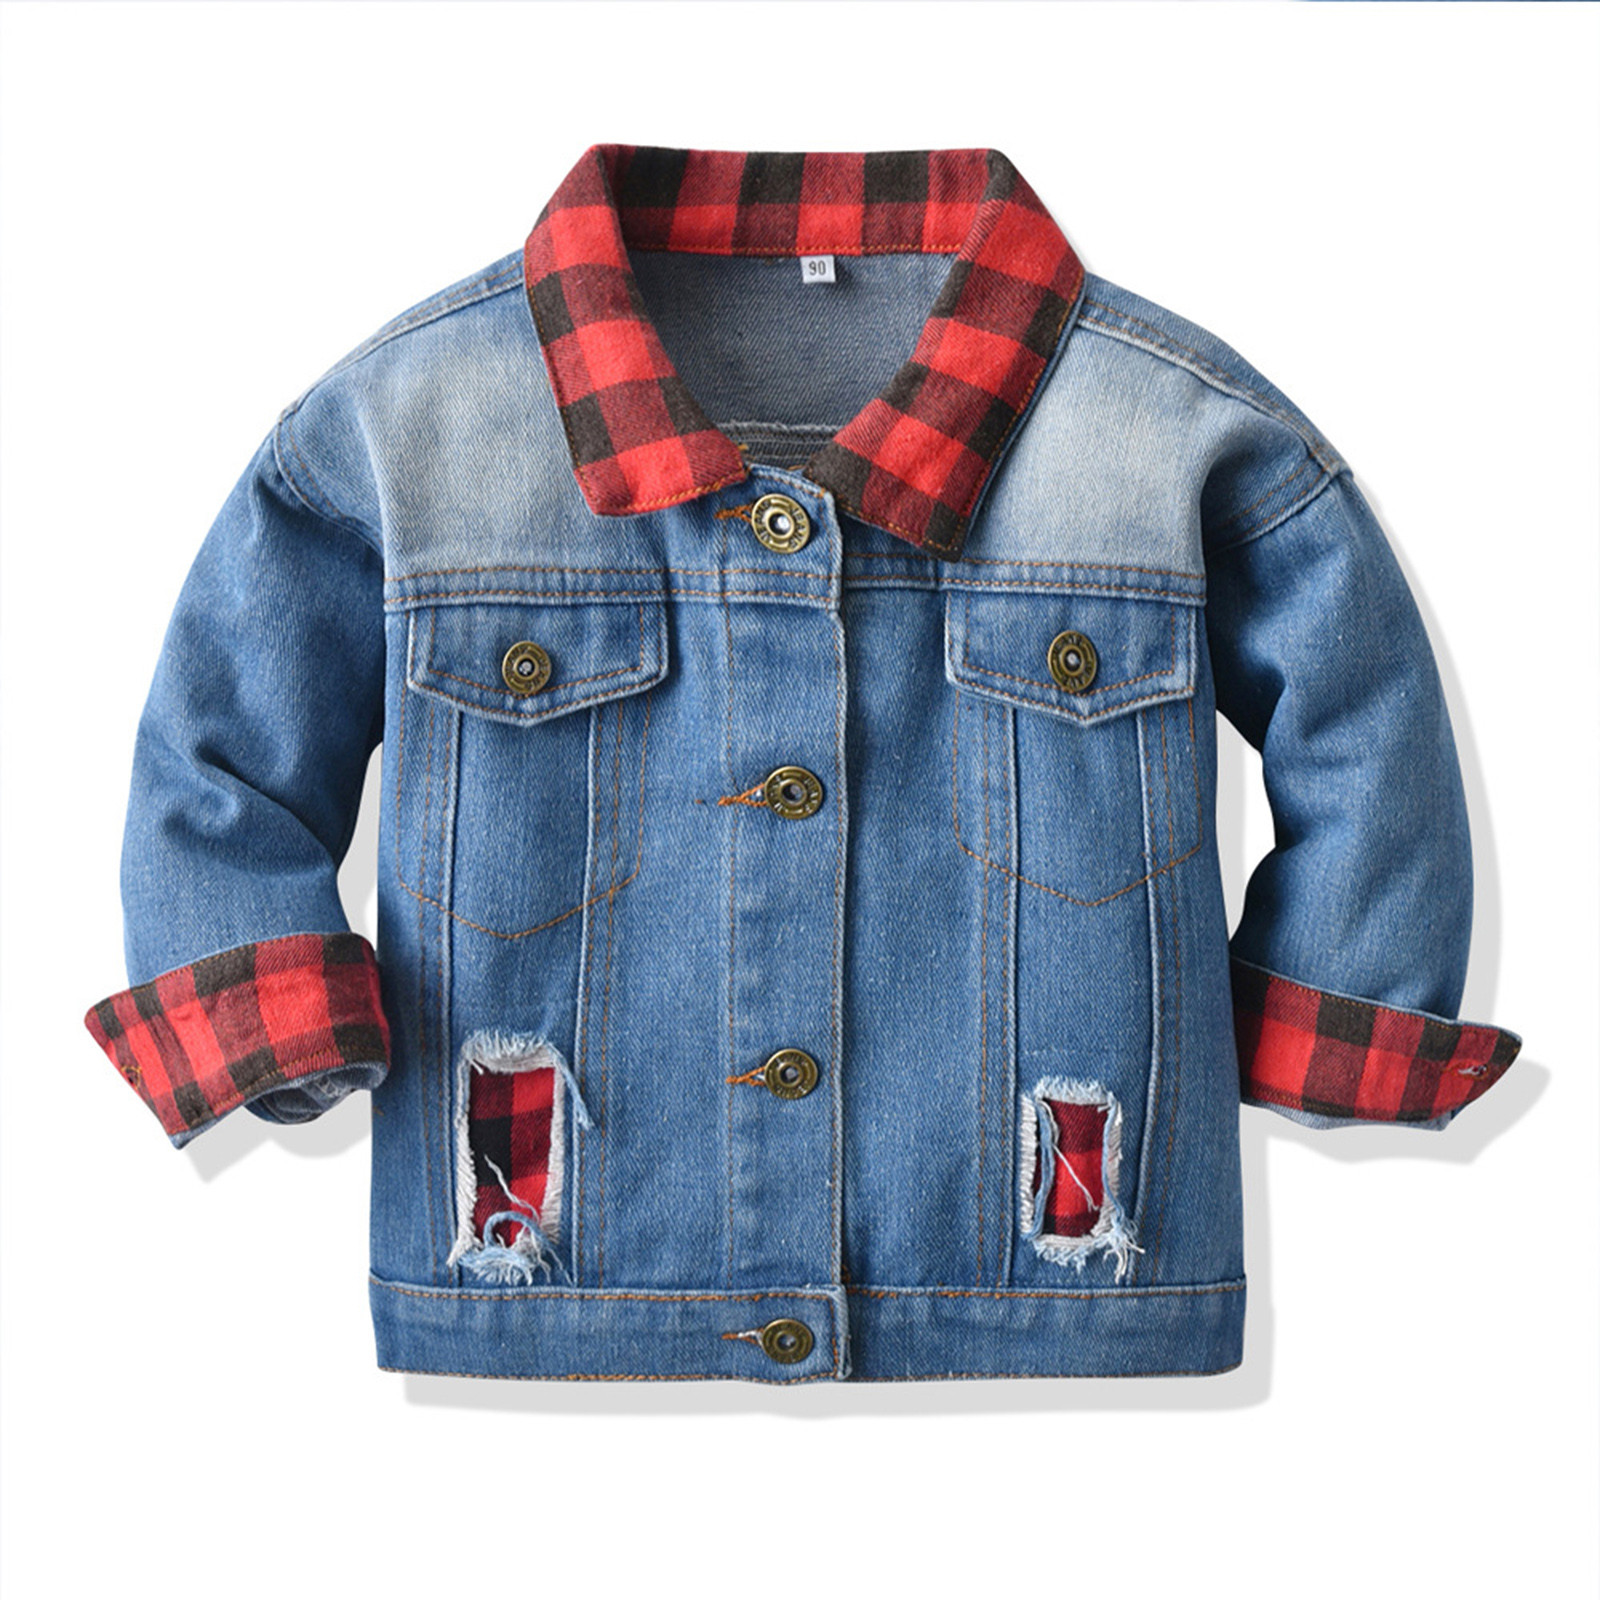 Tall Lightweight Jacket Toddler Children Outwear Red Plaid Over Winter Long Sleeve Denim Jacket Blouse Boys Coats for Baby Boy - image 2 of 6